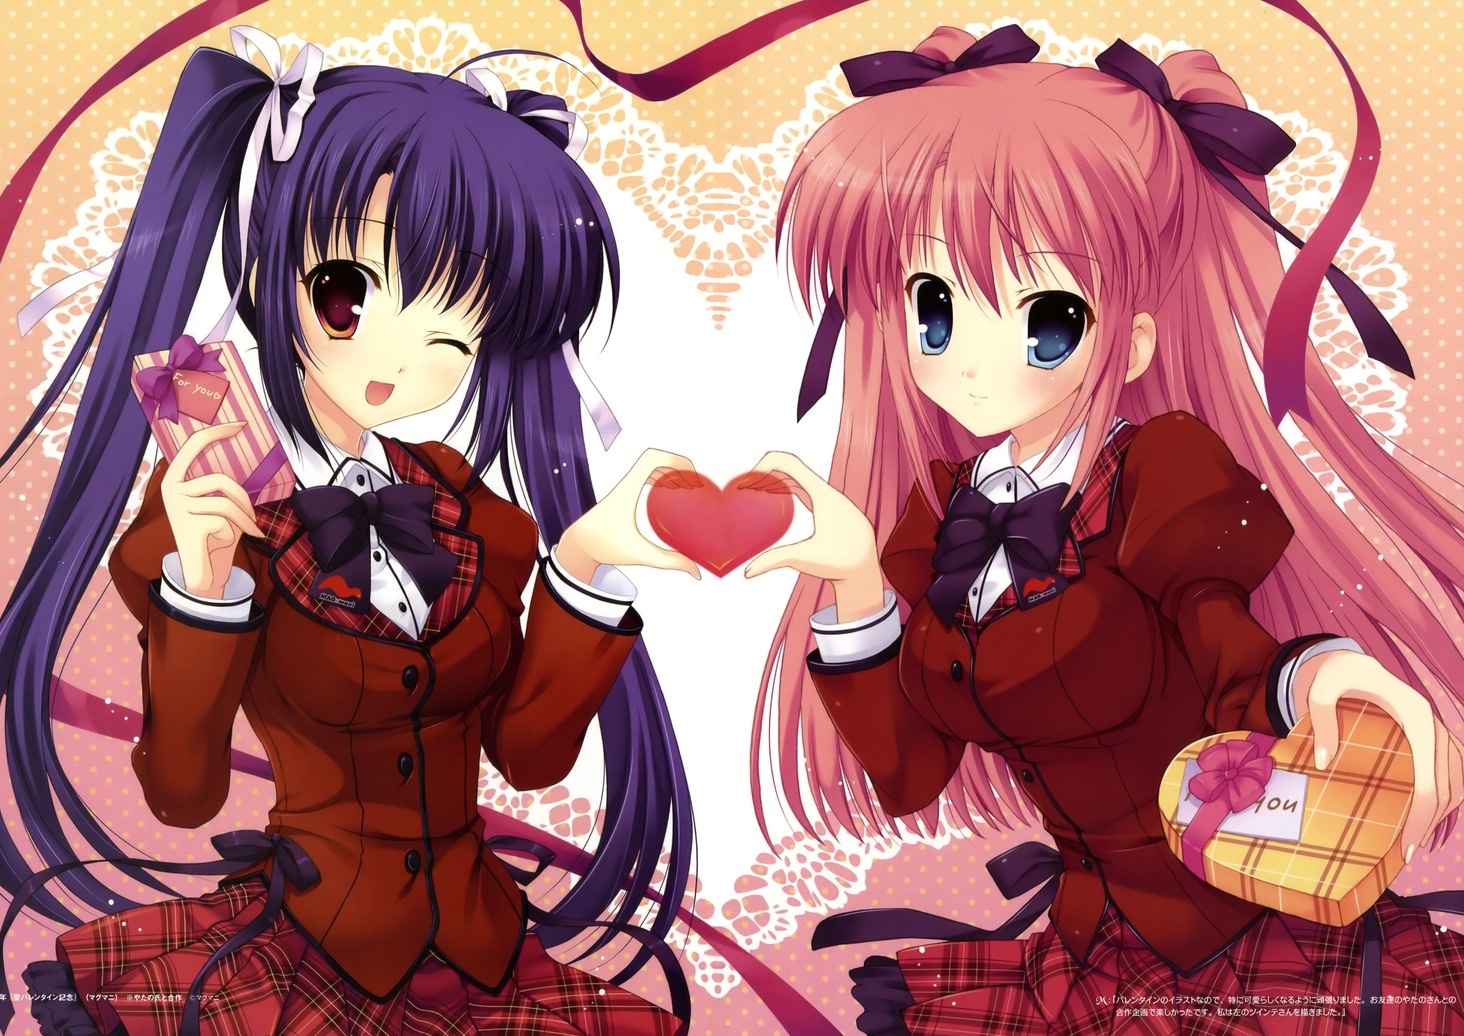 In This Anime Wallpaper Two Cute Girls Are Making A Valentines